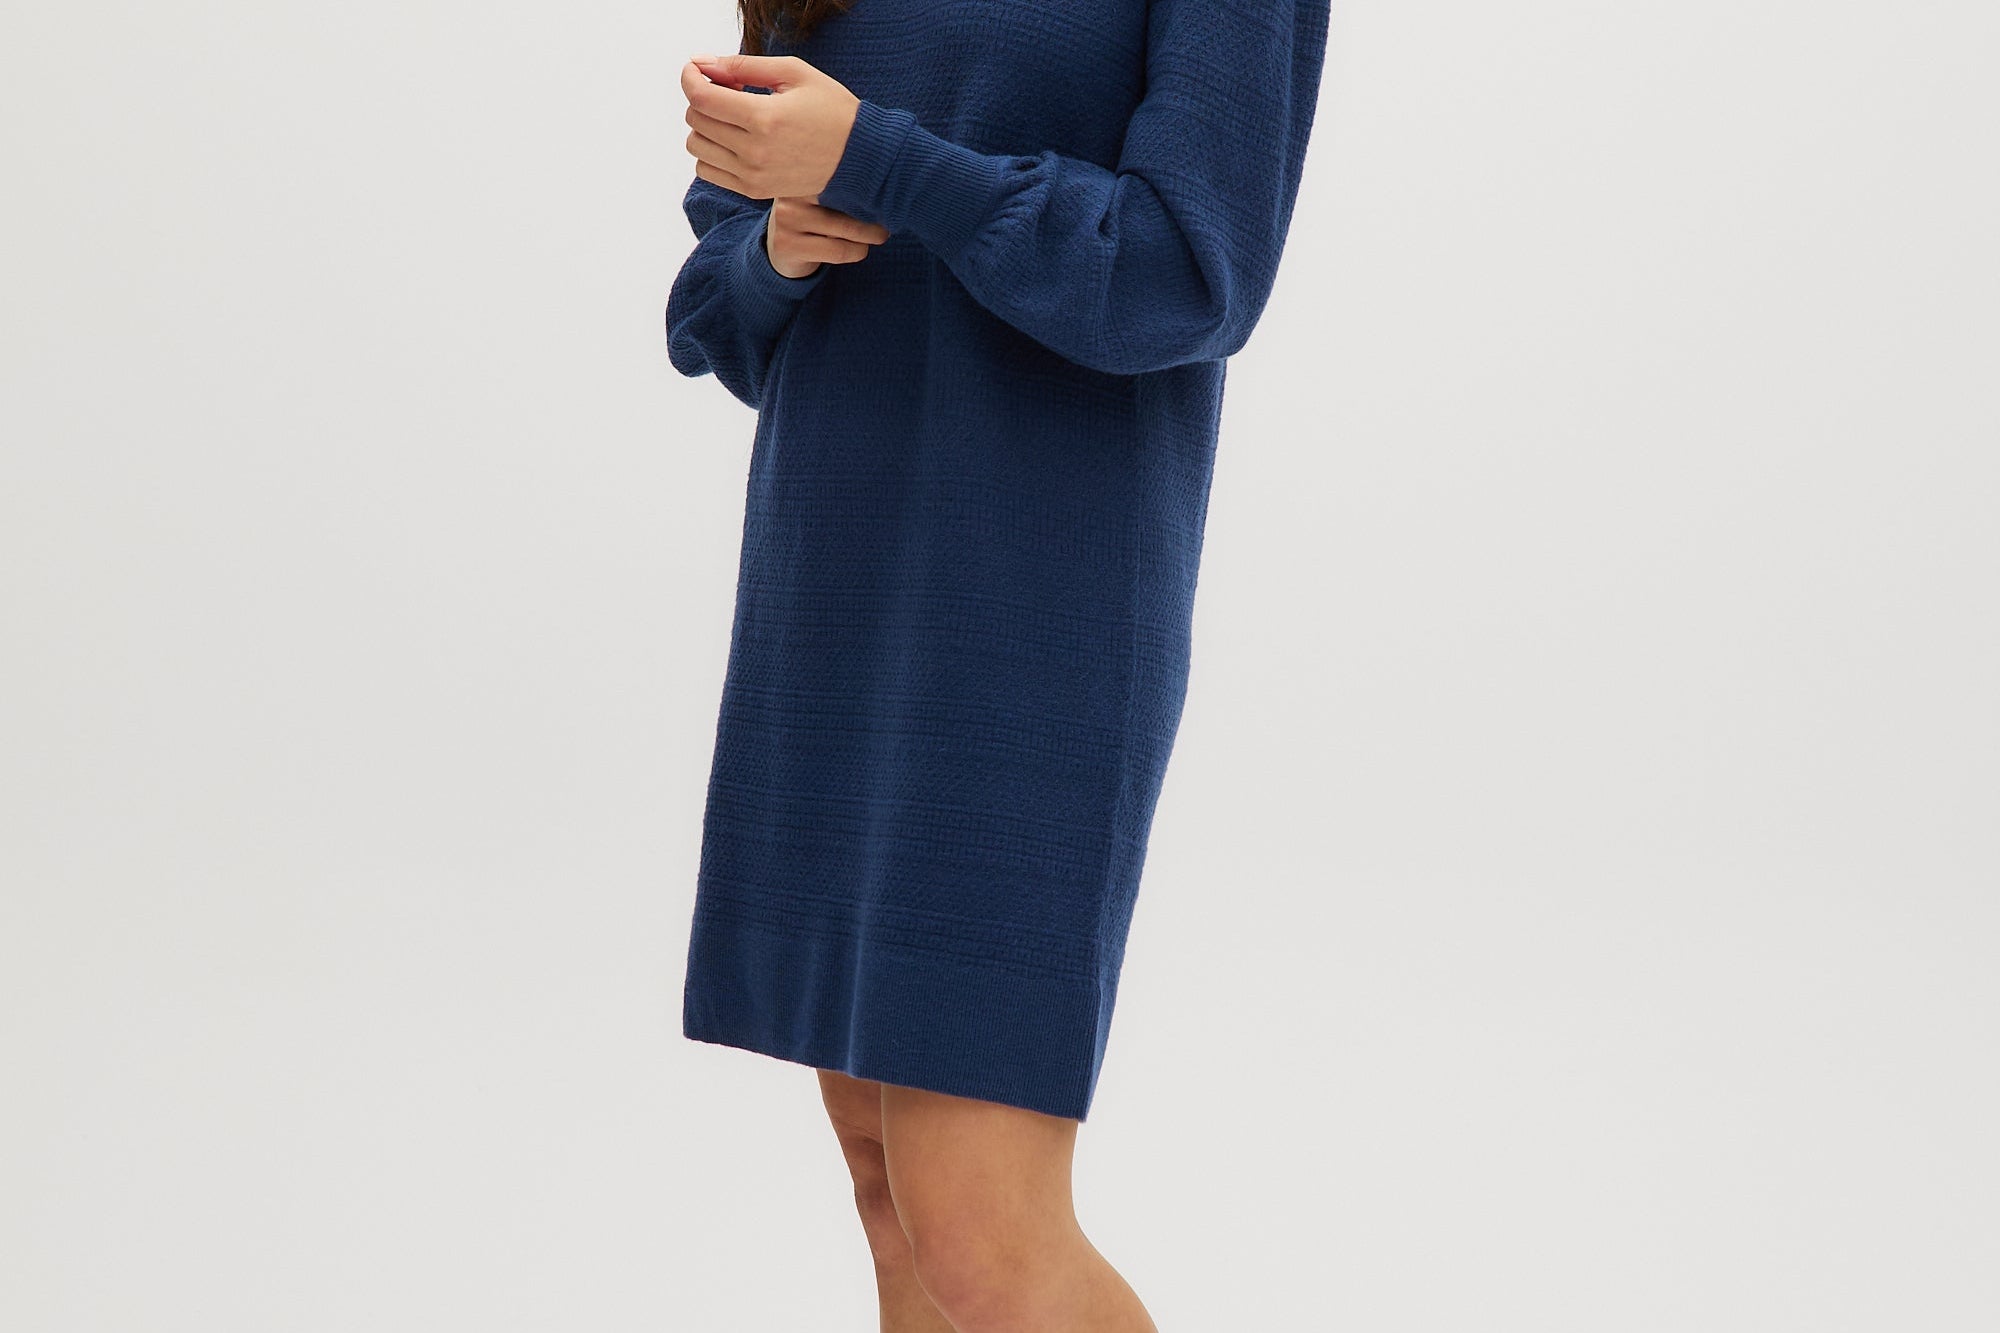 Teal Crew neck sweater dress side